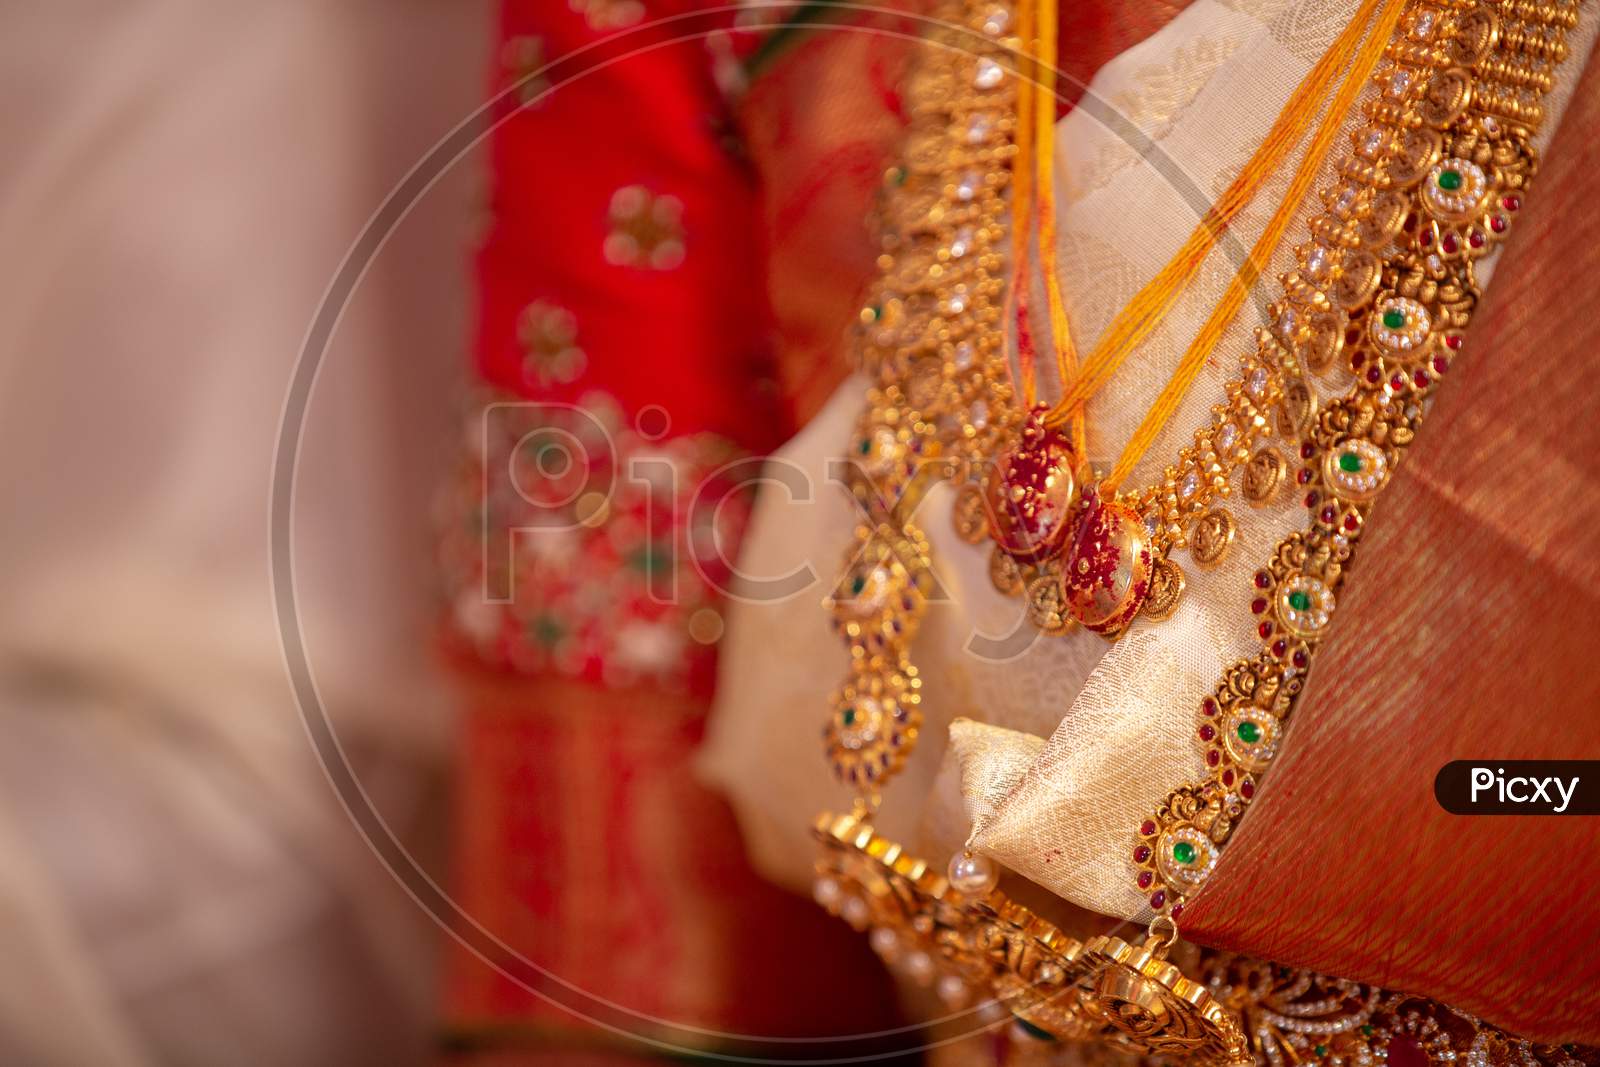 South Indian Wedding With  Bride  After Mangalya Dharanam  At a Wedding Ceremony